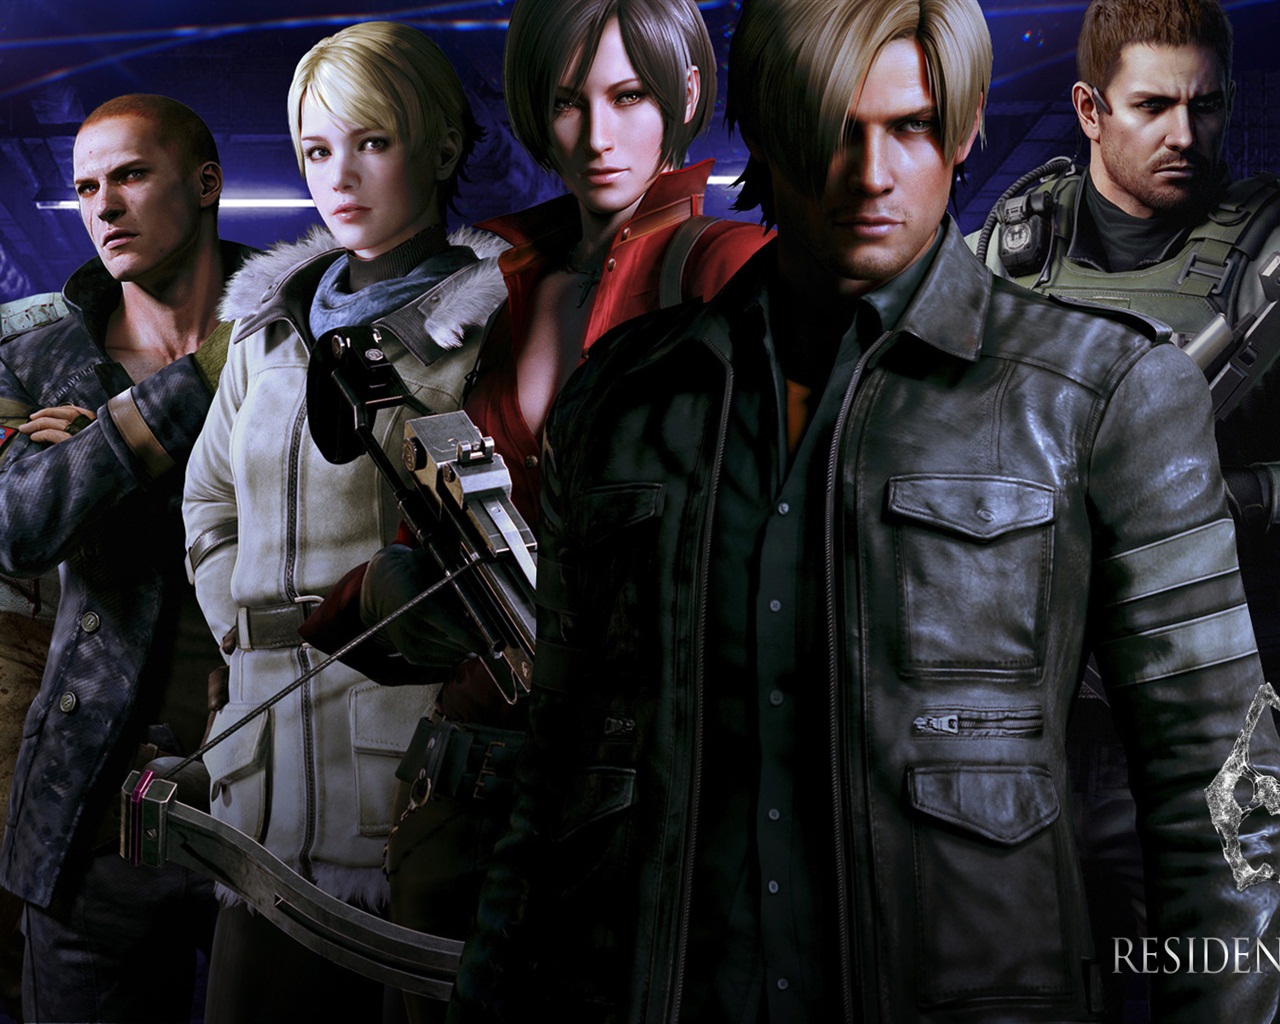 Resident Evil 6 HD game wallpapers #10 - 1280x1024